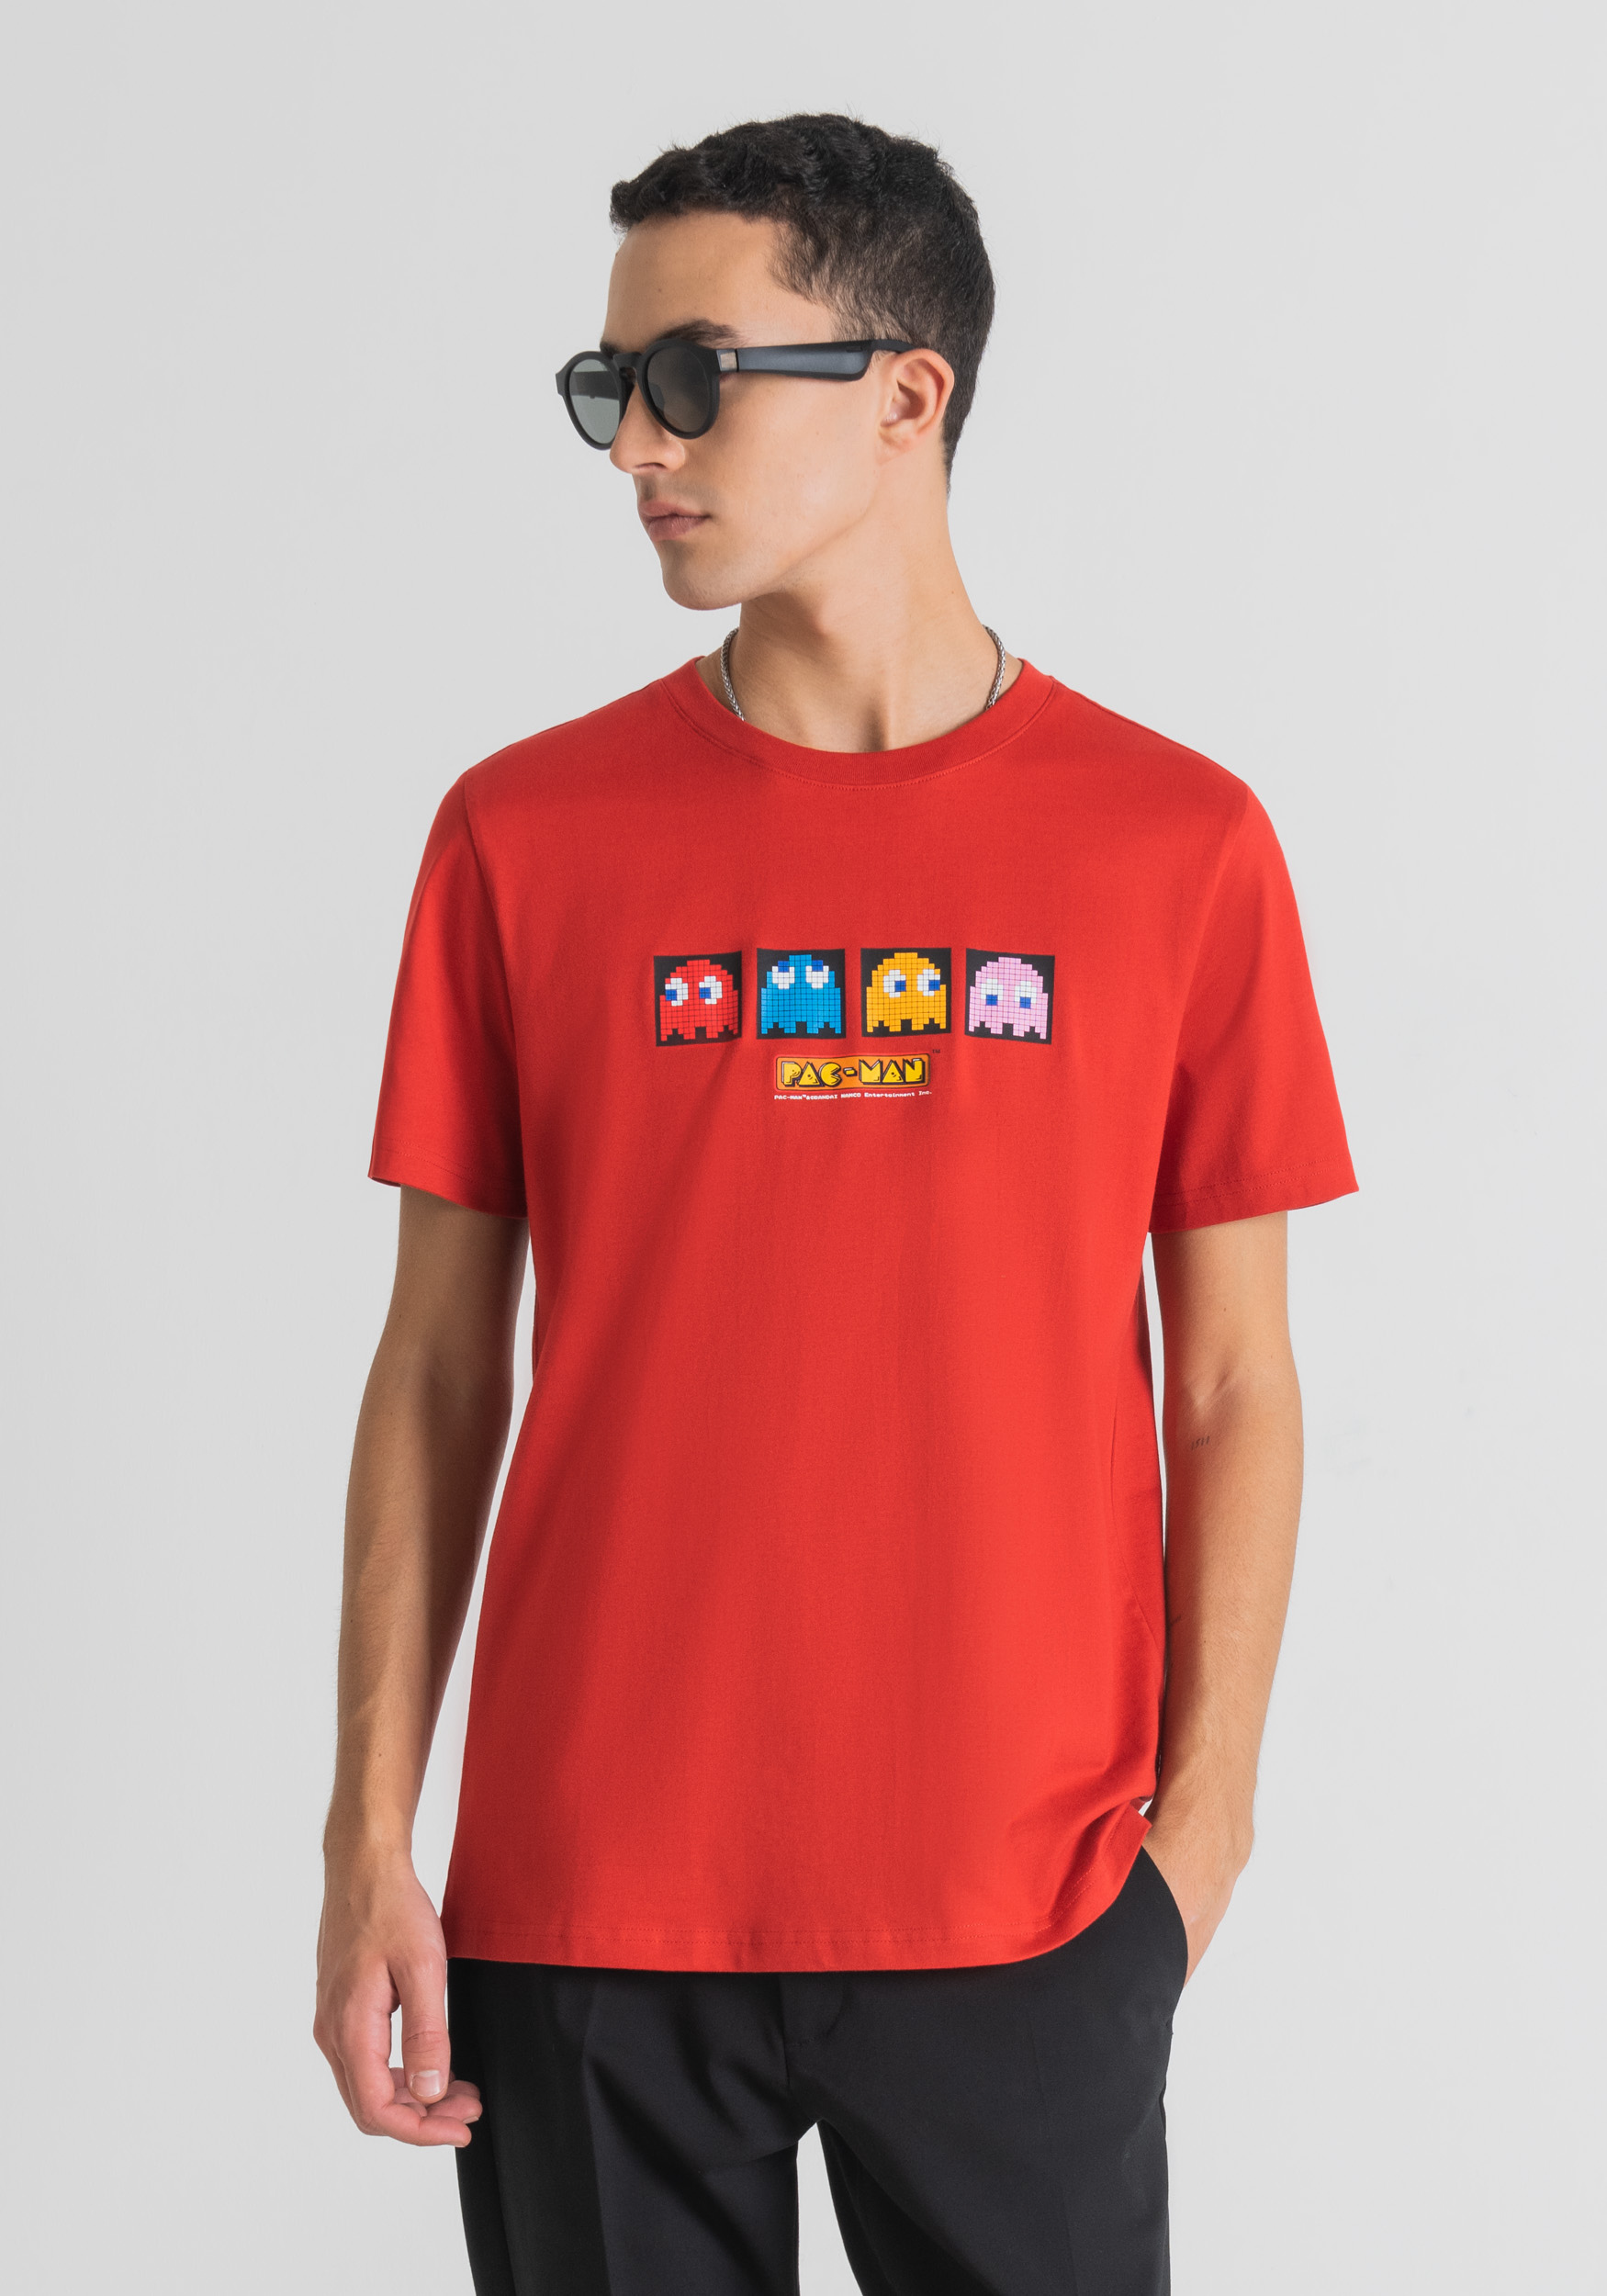 REGULAR FIT T-SHIRT IN 100% COTTON WITH PAC-MAN PRINT